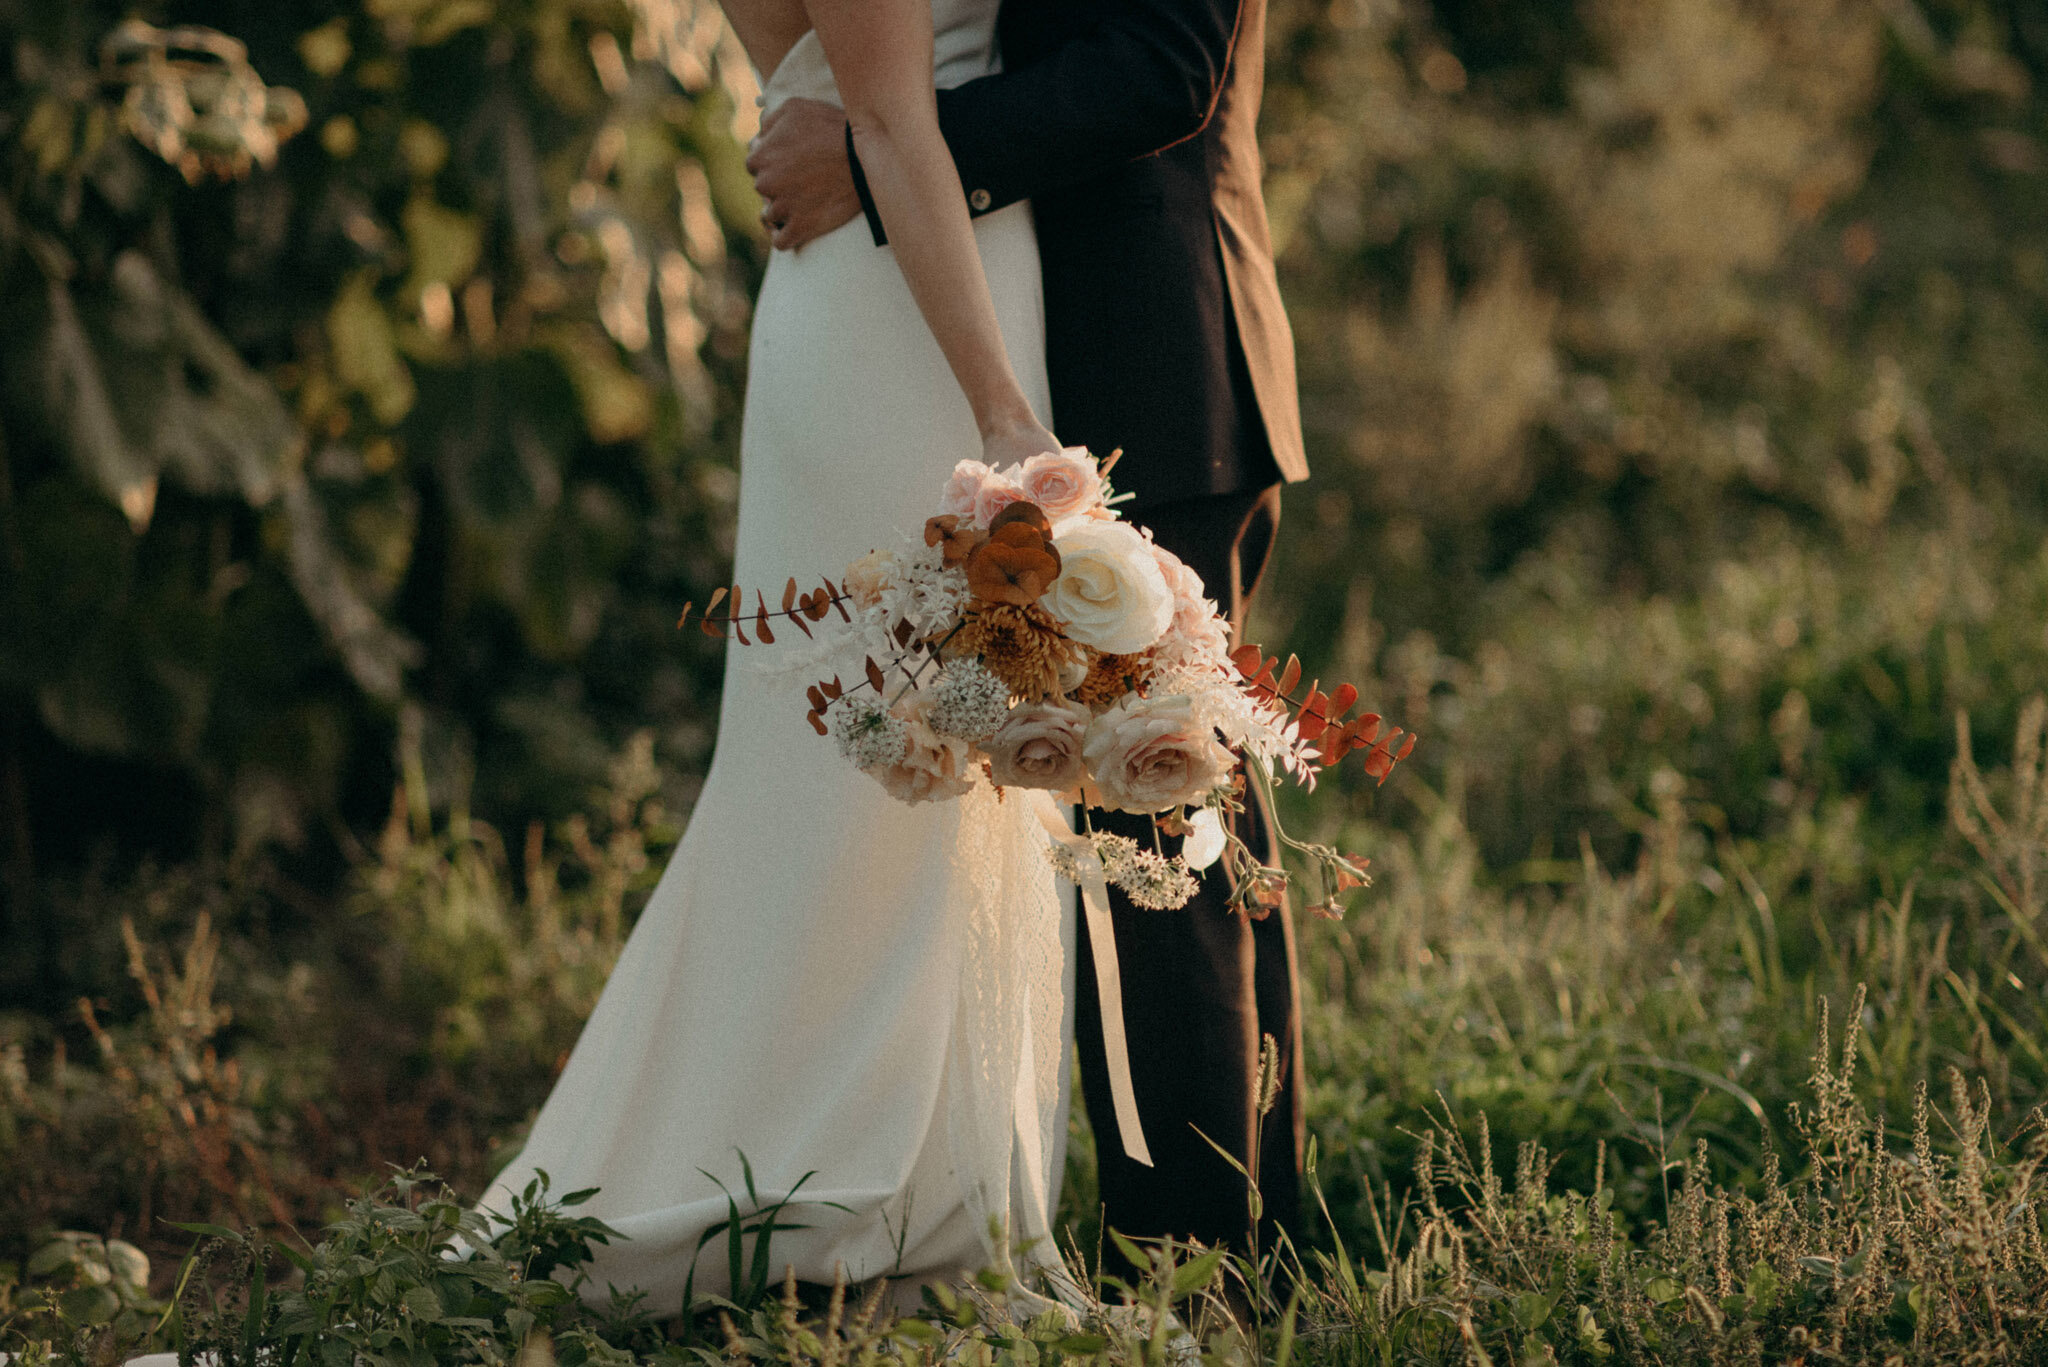  An intimate wedding at Good Family Farms with caterer Sumac and Salt by Toronto wedding photographer Daring Wanderer // www.daringwanderer.com 